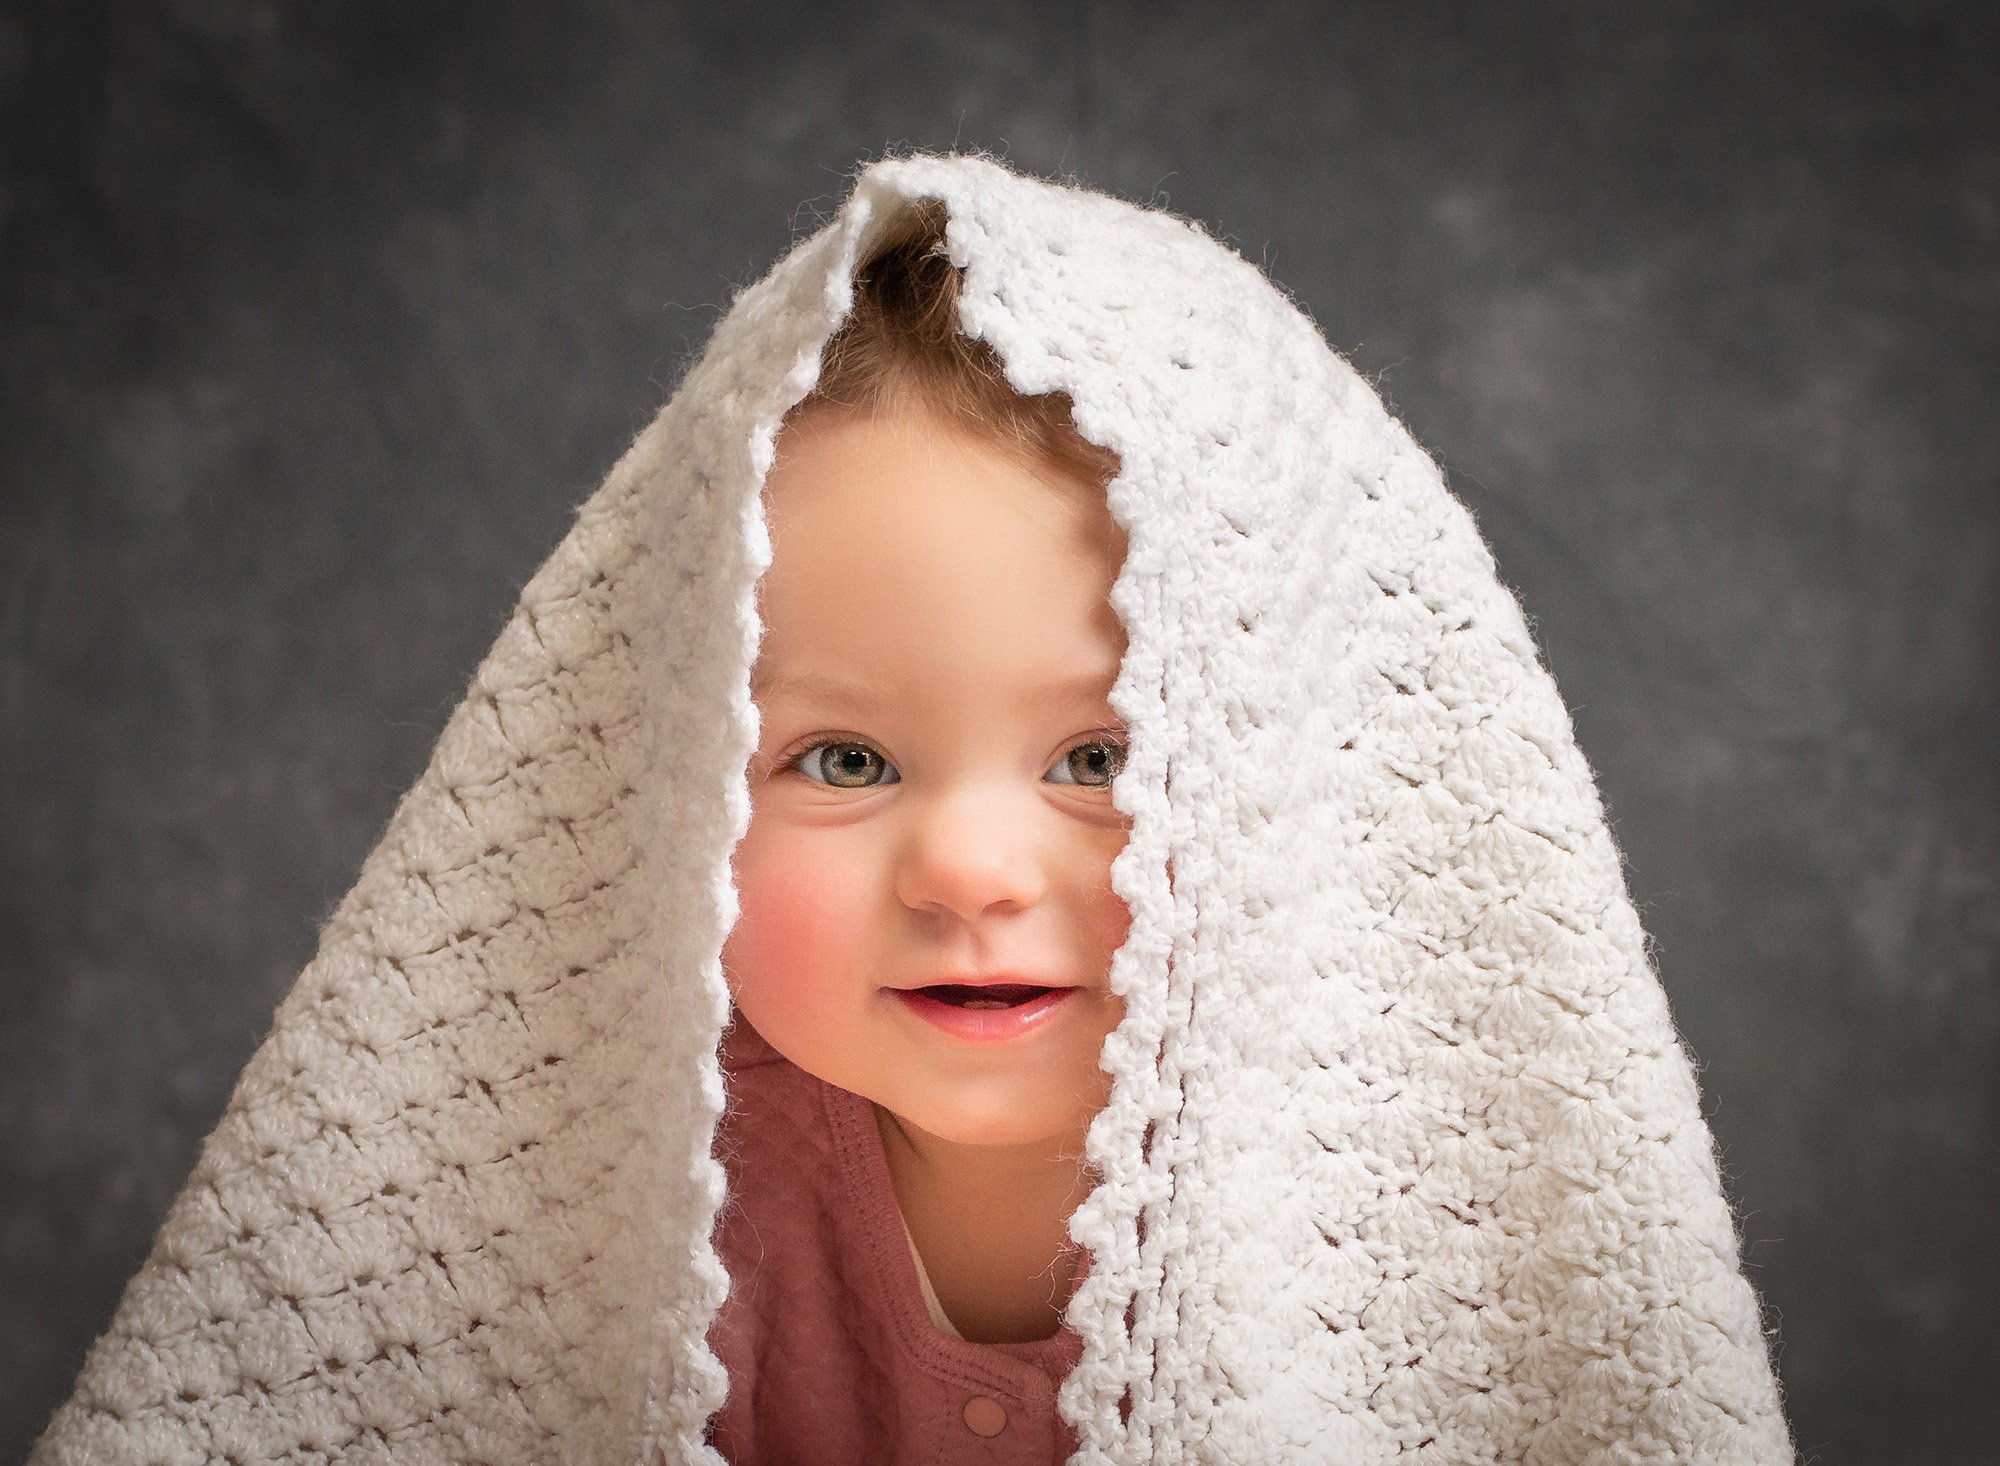 smiling baby girl in pink with white blanket covering her